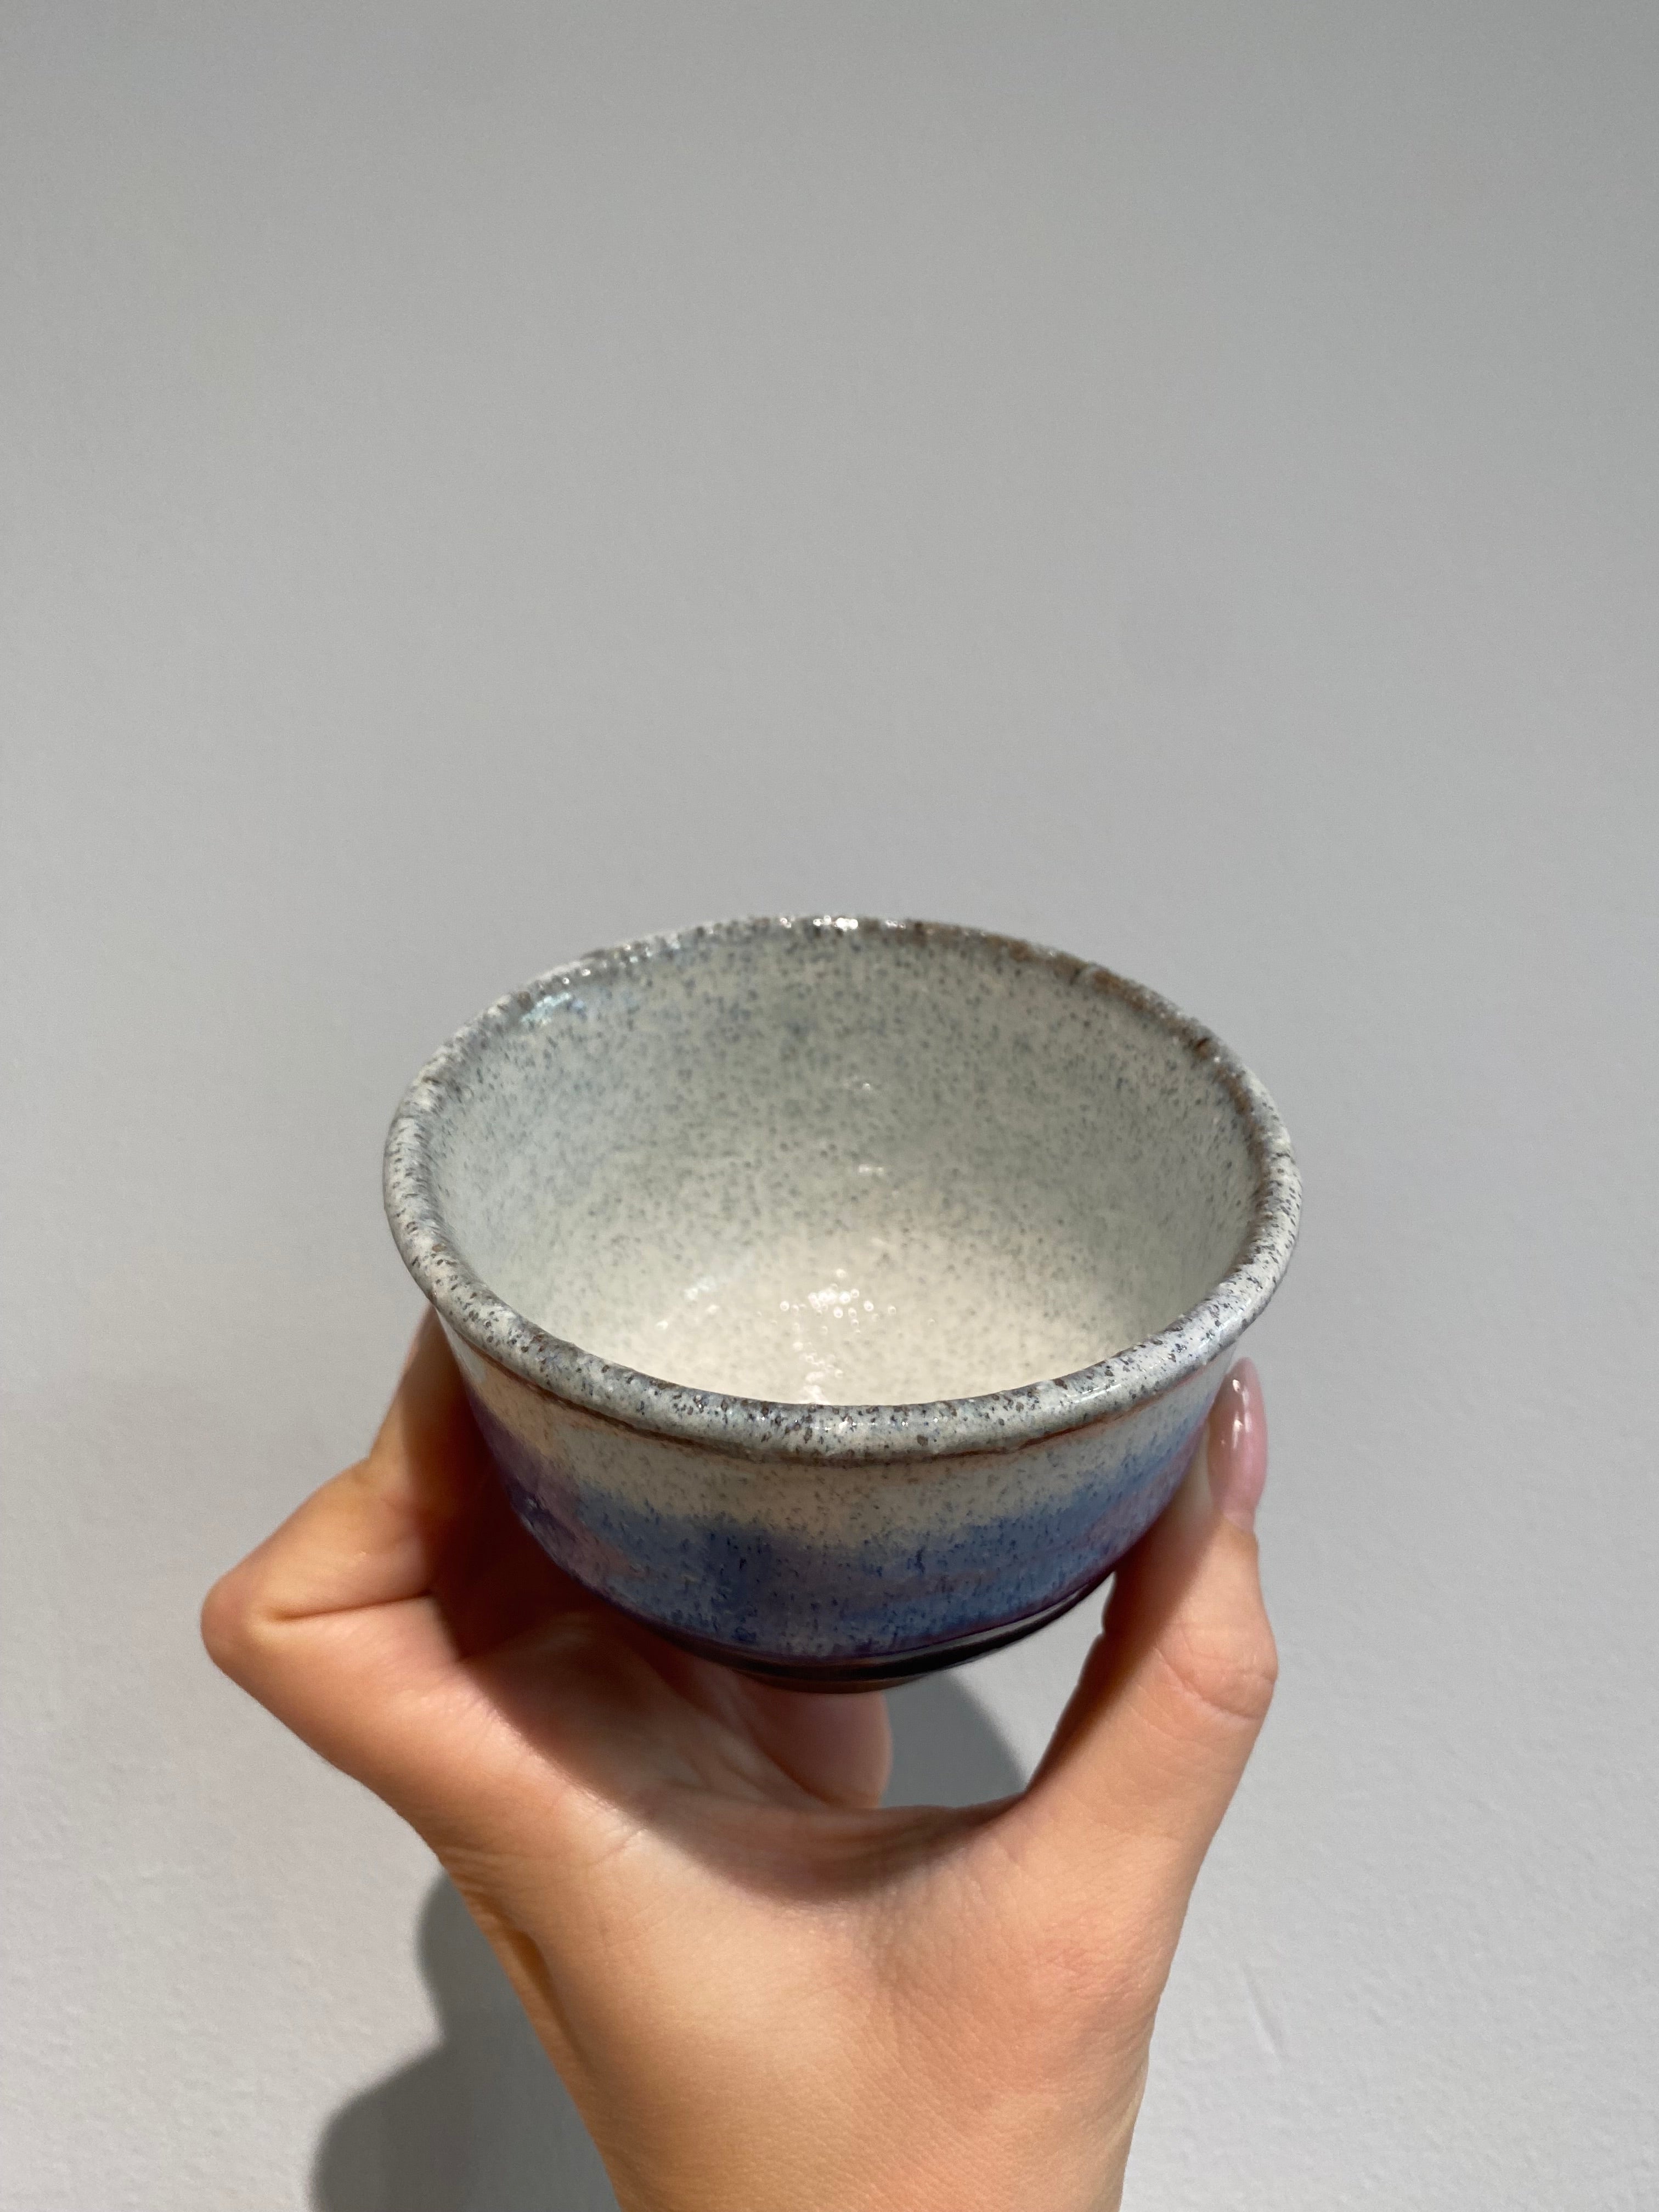 Small cup with blue shades and sparkles